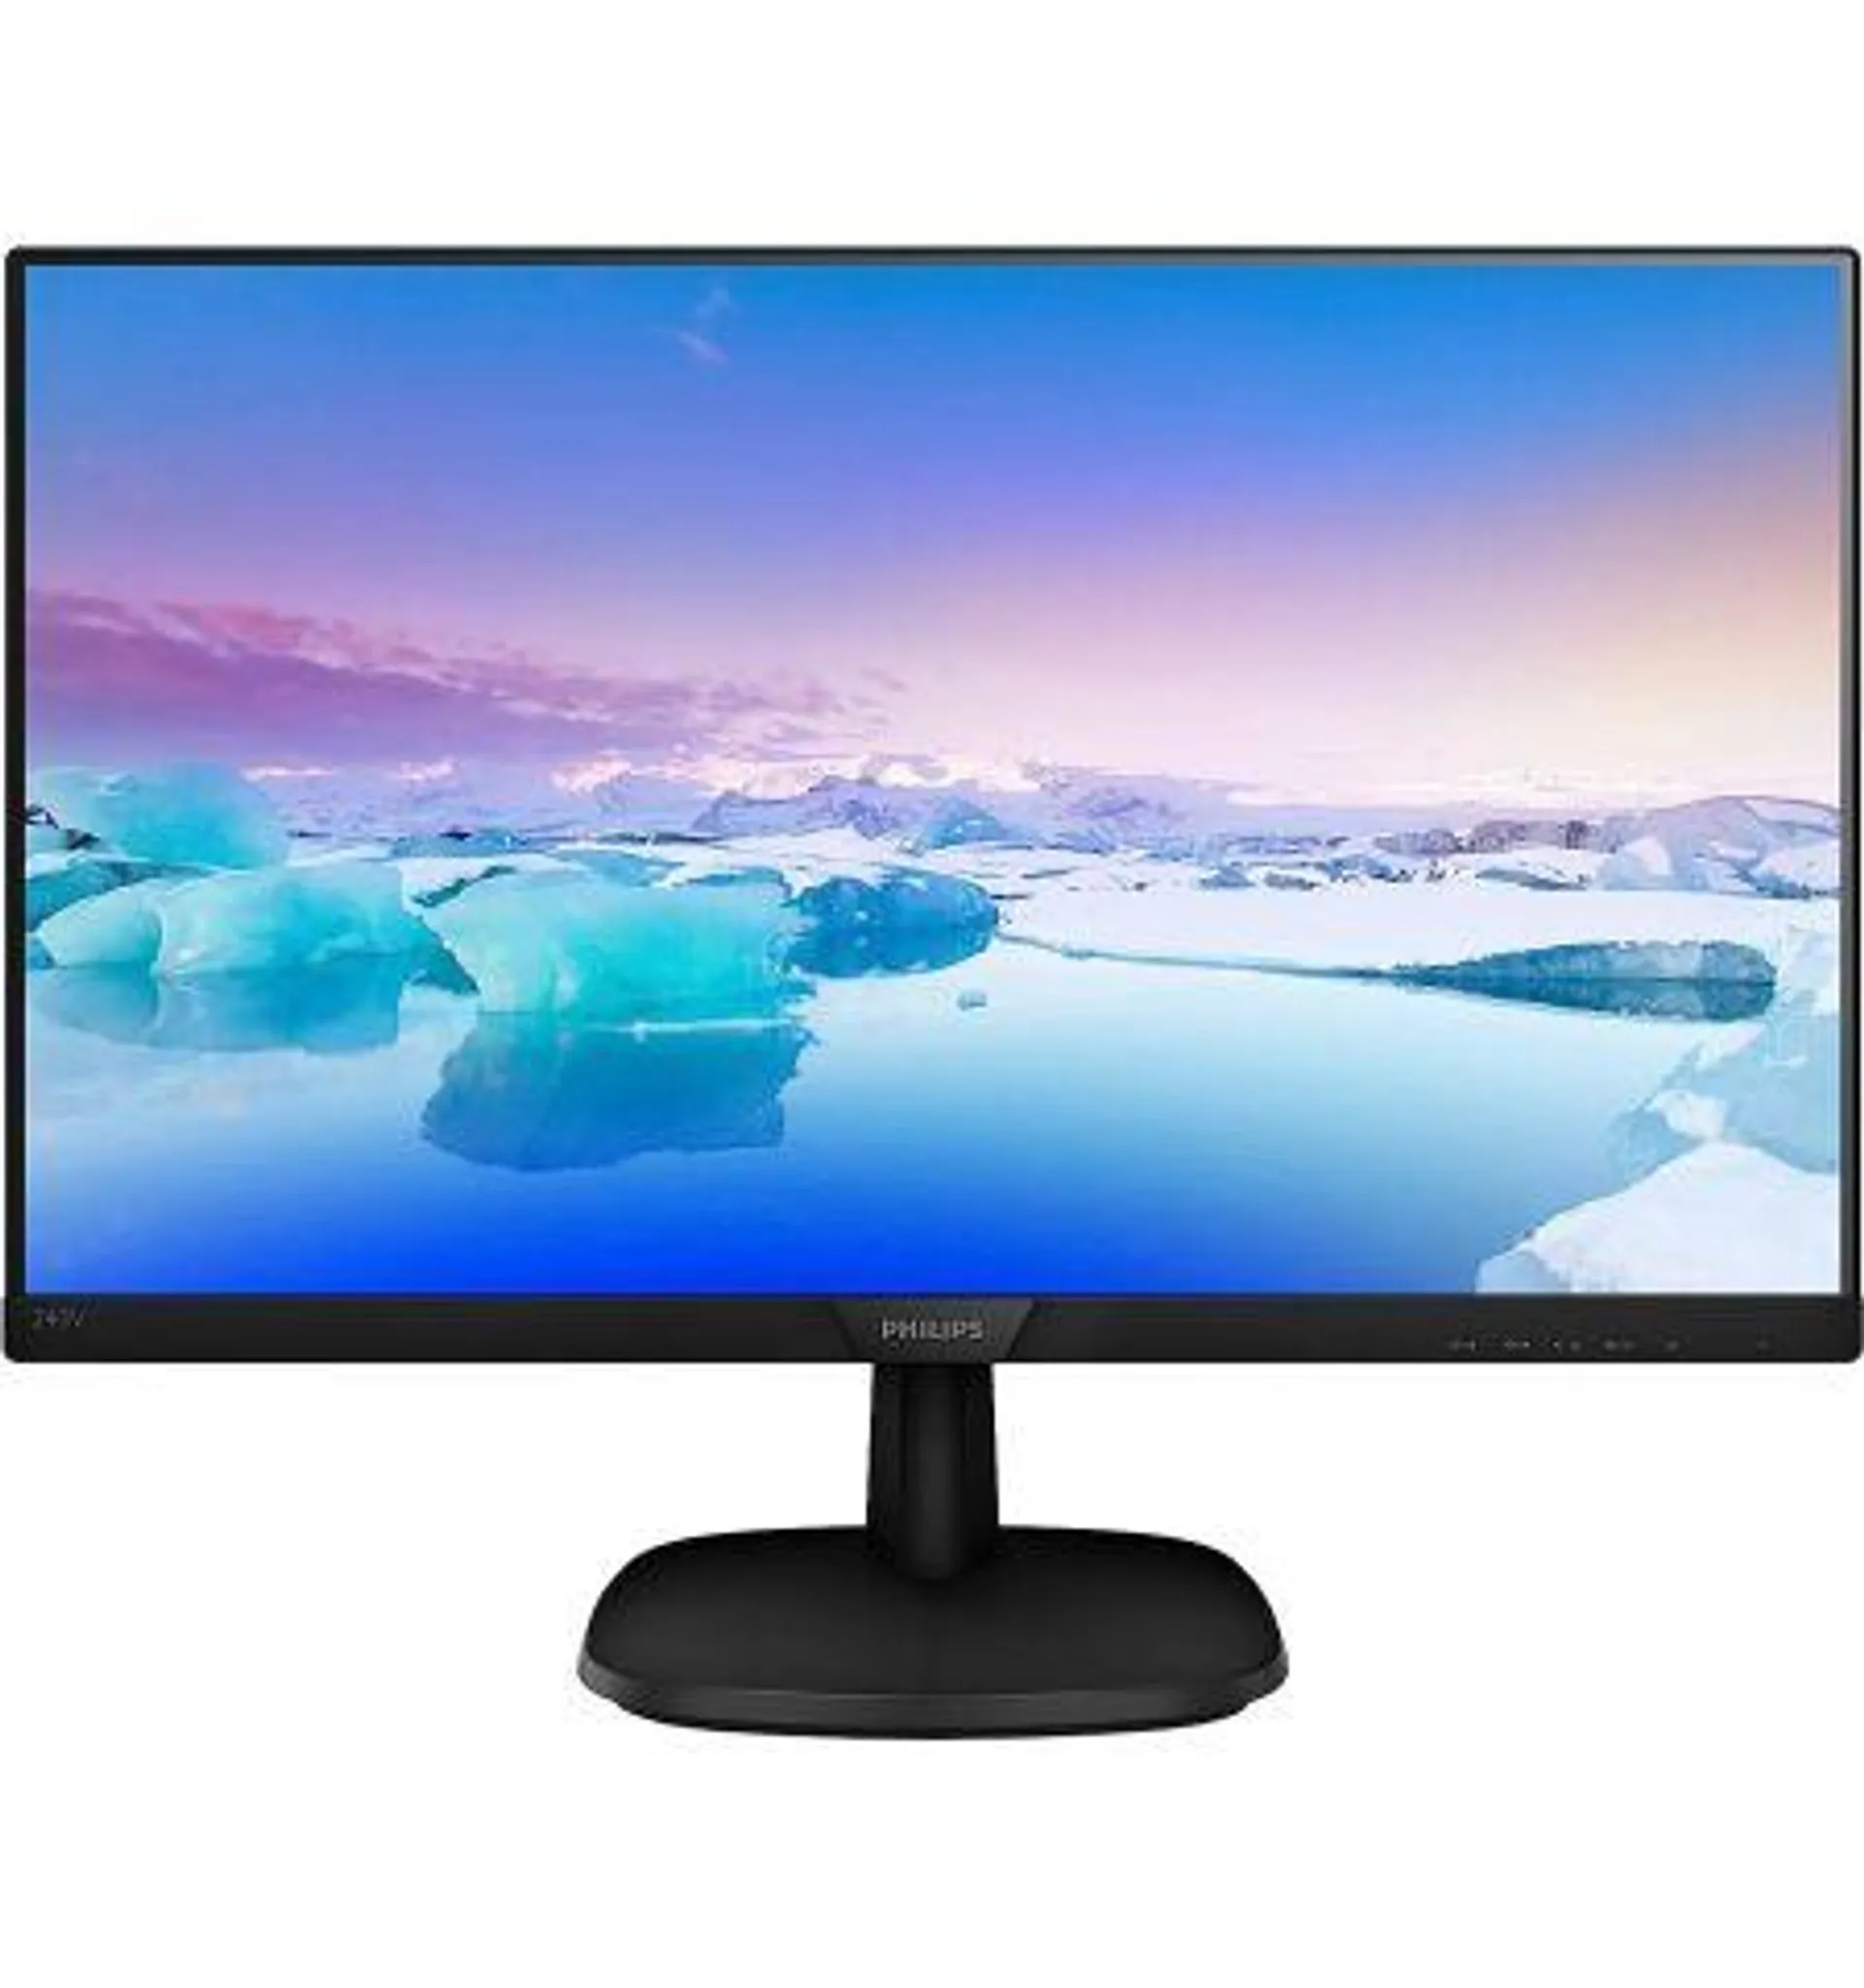 Philips 27" Monitor with HDMI